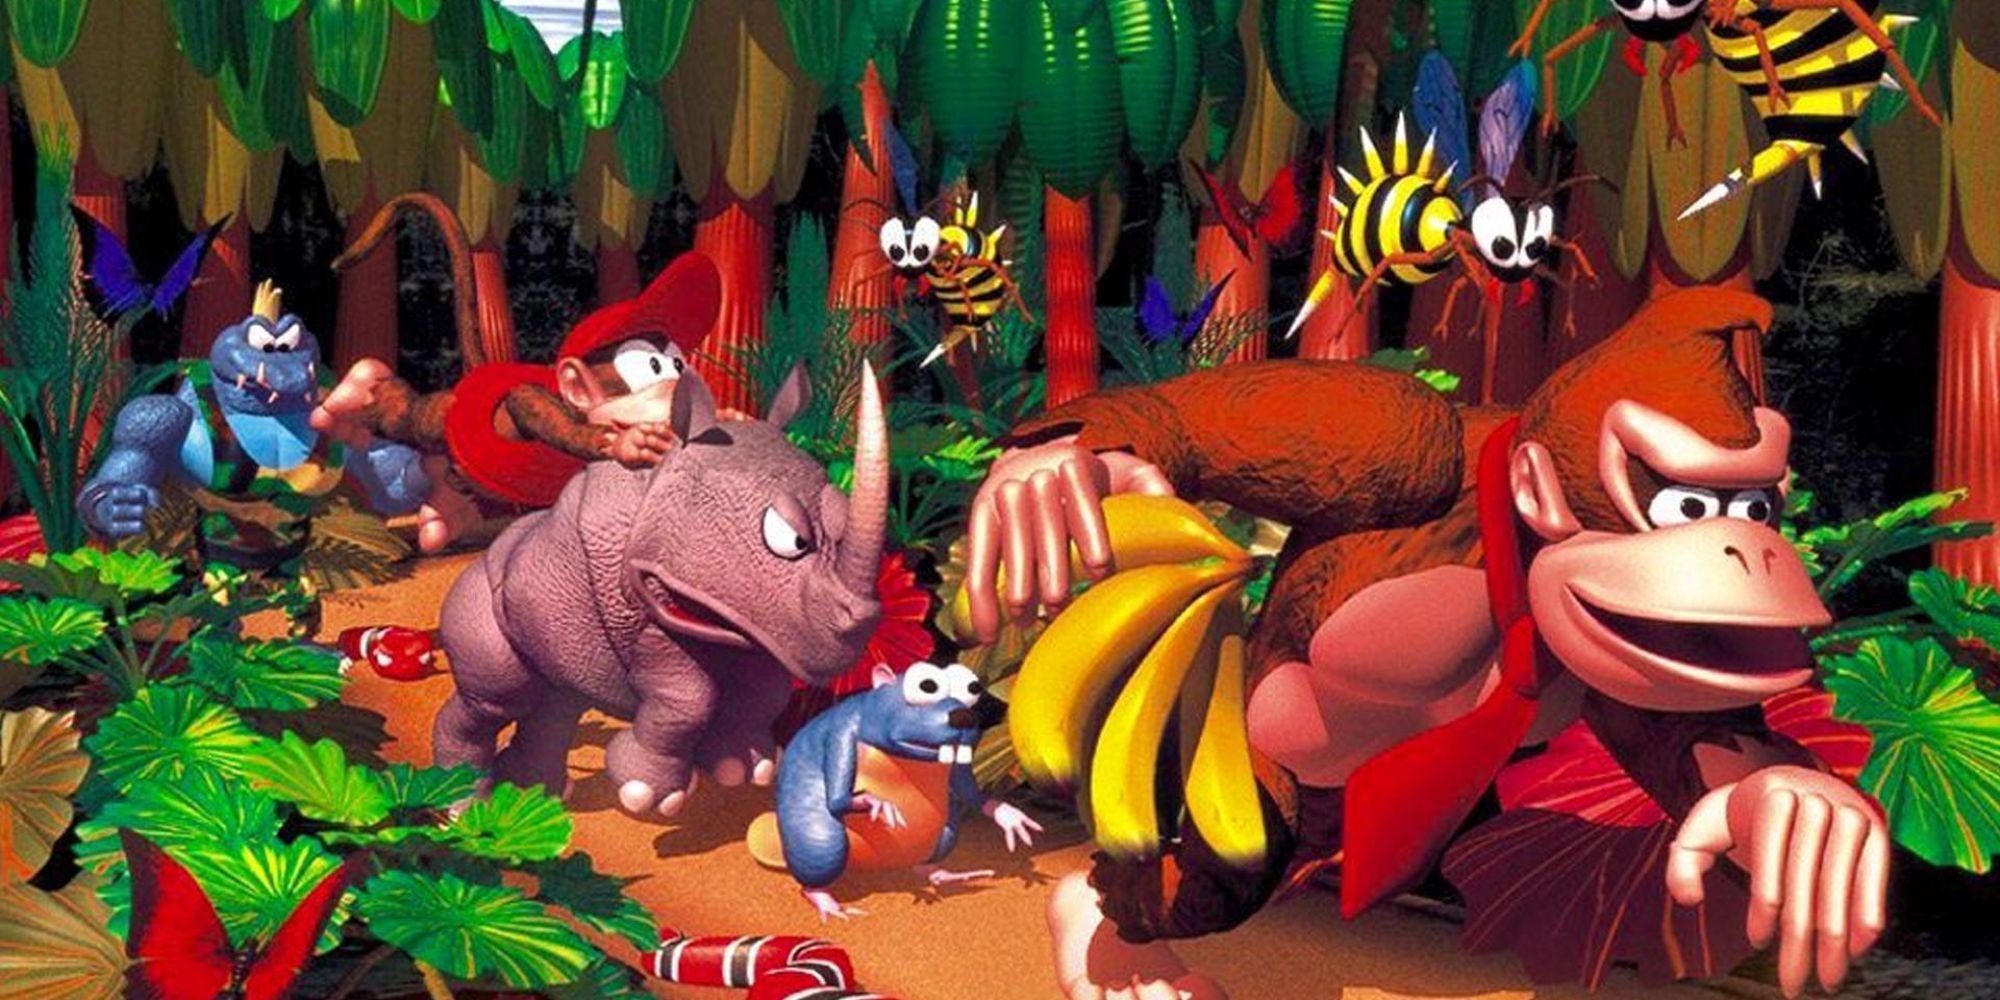 Donkey and Diddy Kong run through the jungle followed by enemies and friends